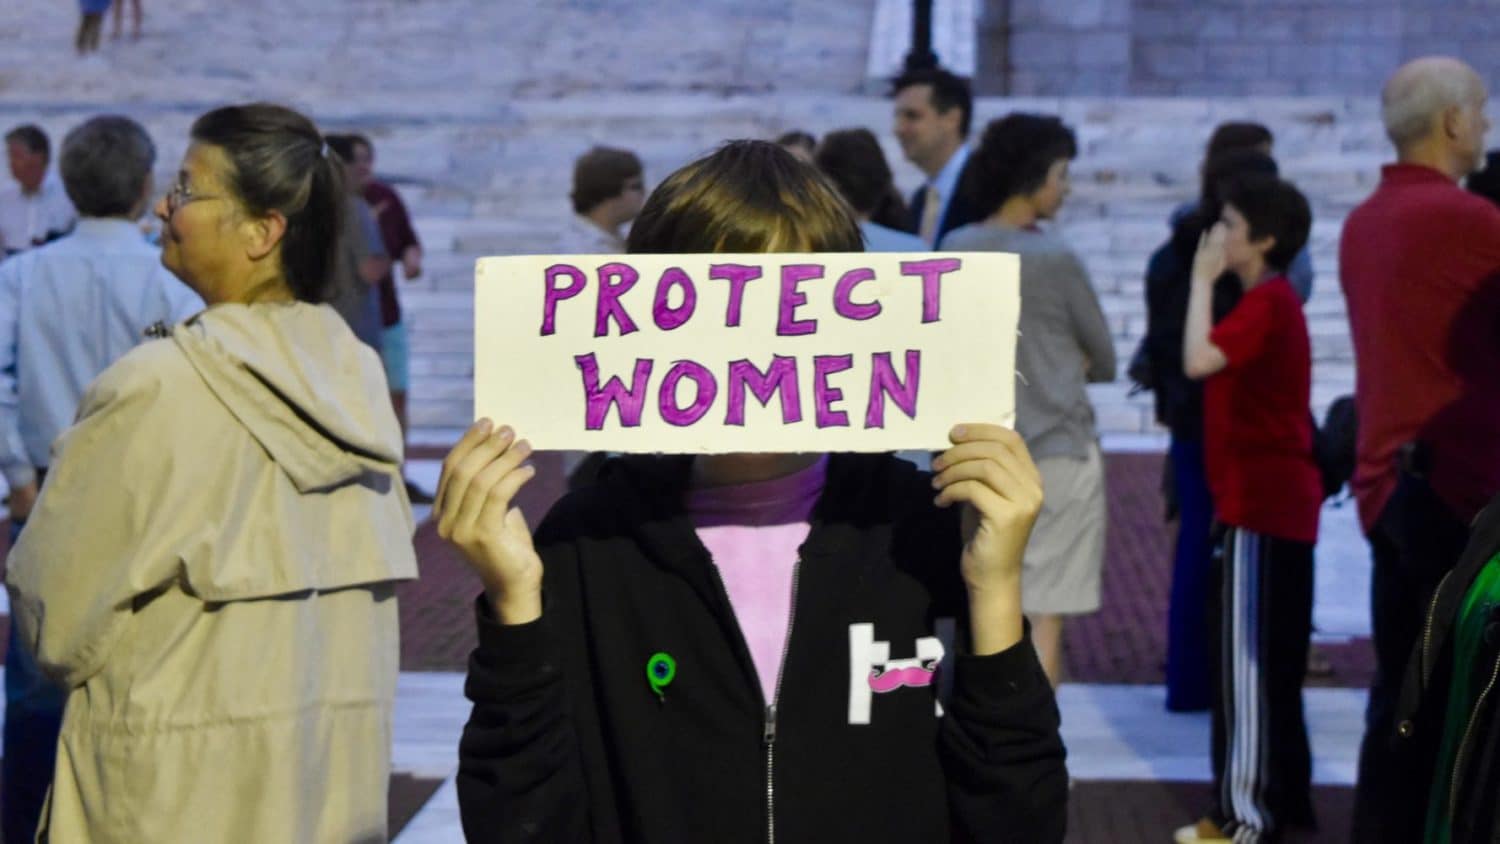 Rhode Island News: The Woman Project is working to protect your health care